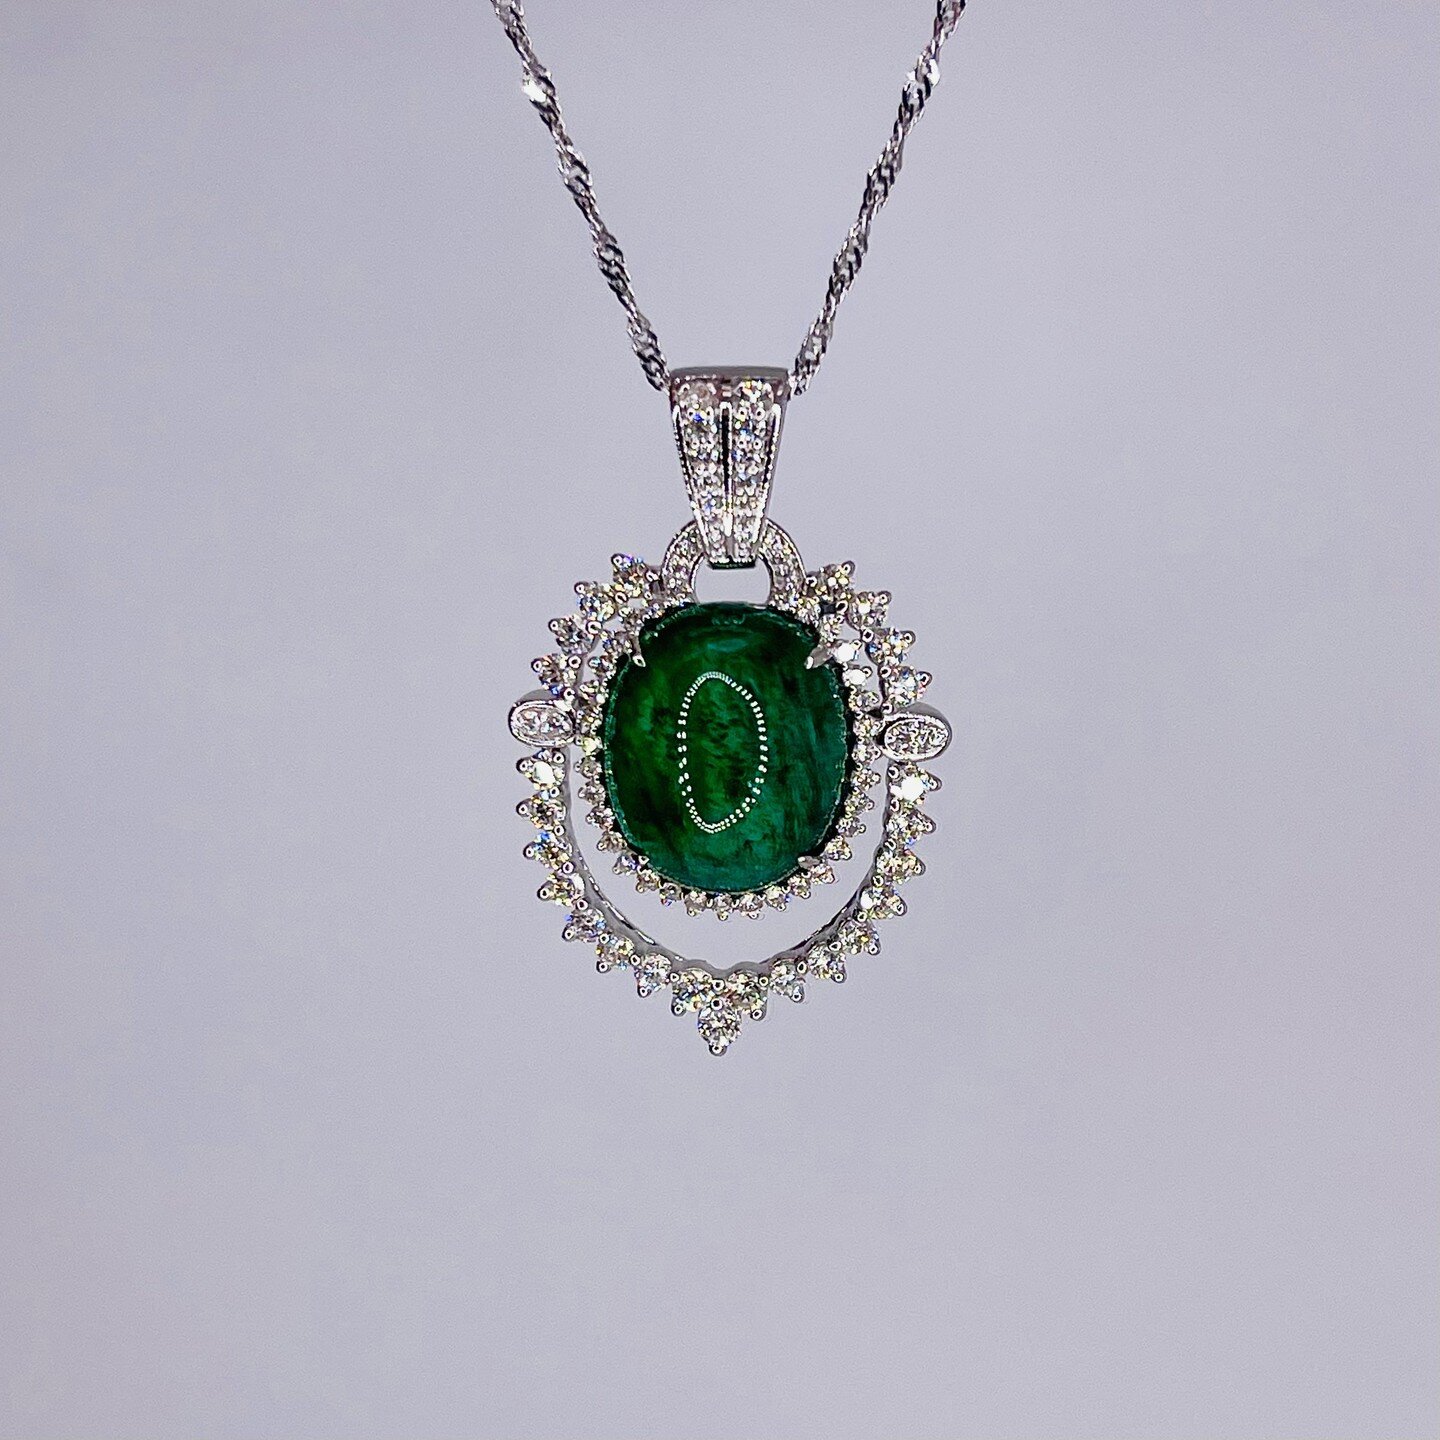 18 karat white gold Emerald pendant with Diamonds

Need more information?
Please message us.

#stonesjewellery
#finejewel #gold #earring #ring #necklace #everyday
#18k #18kgold #18kwhitegold #whitegold #jewellery #jewelry #canadianmade #craftsman
#lo